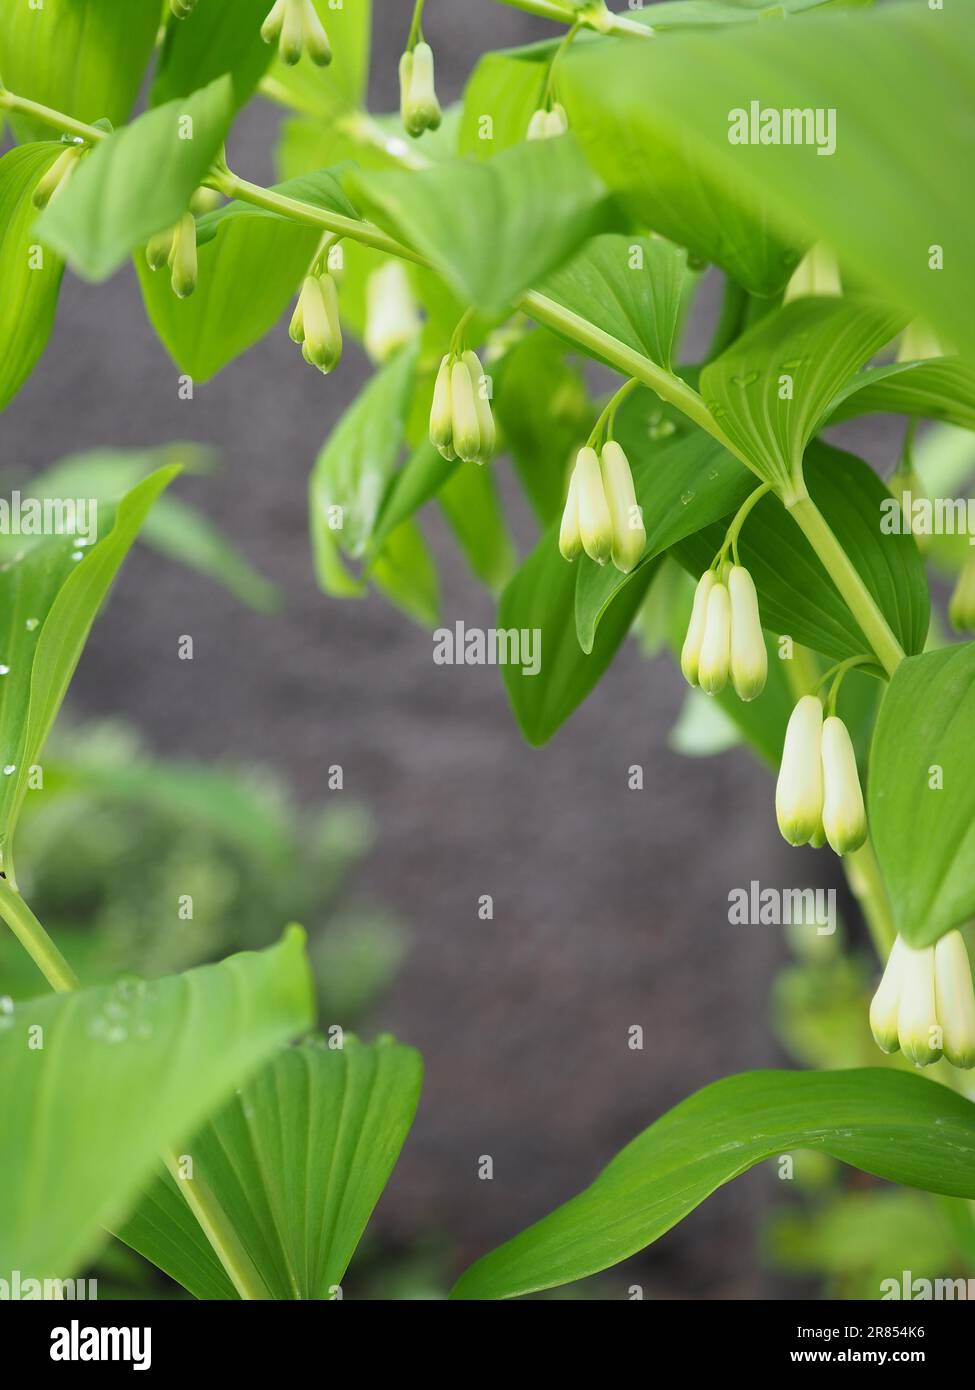 Close up of the white bell shaped flowers on an arching stem of Solomon's Seal (Polygonatum multiflorum) against a dark background Stock Photo